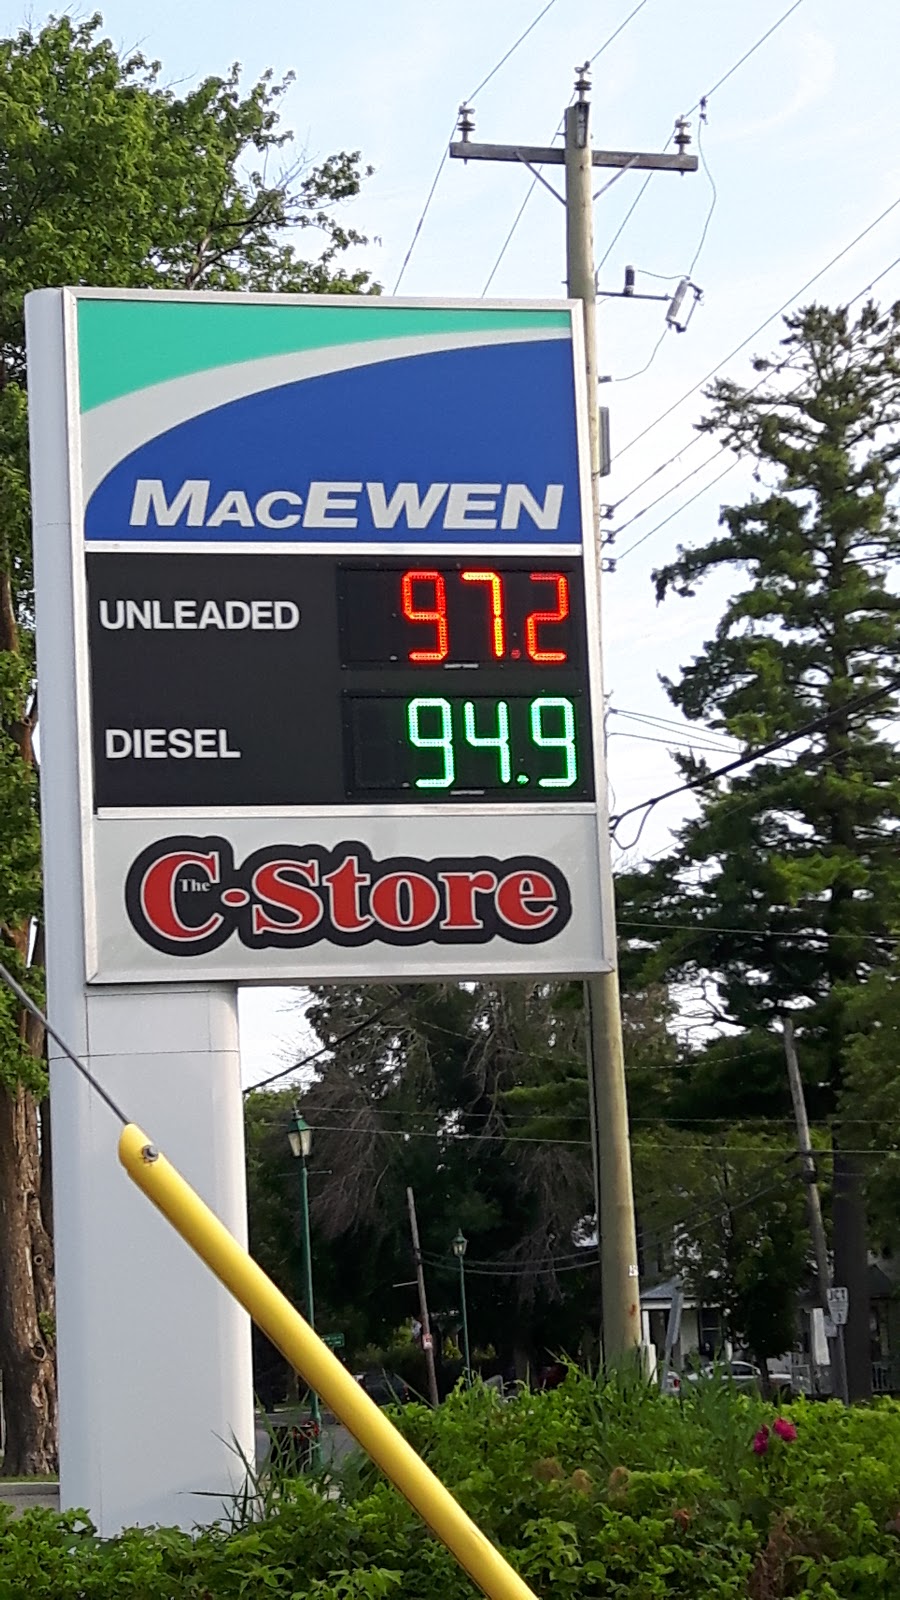 MacEwen Russell | gas station | 1112 Concession St, Russell, ON K4R 1C8, Canada | 6134455332 OR +1 613-445-5332